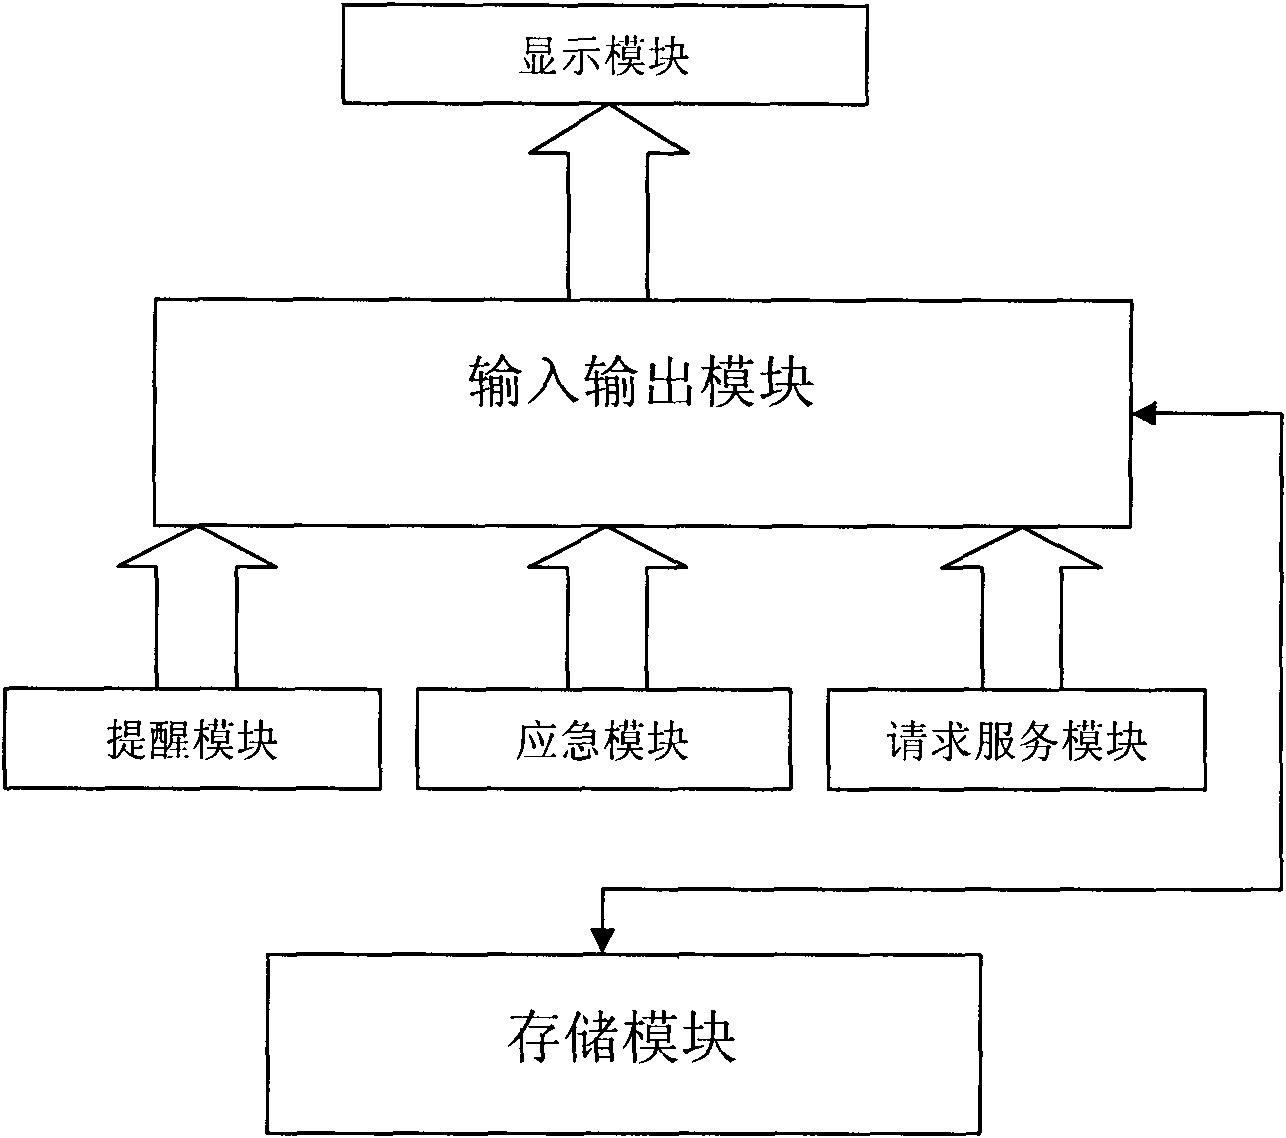 Information interaction method based on information physical system and radio frequency technique